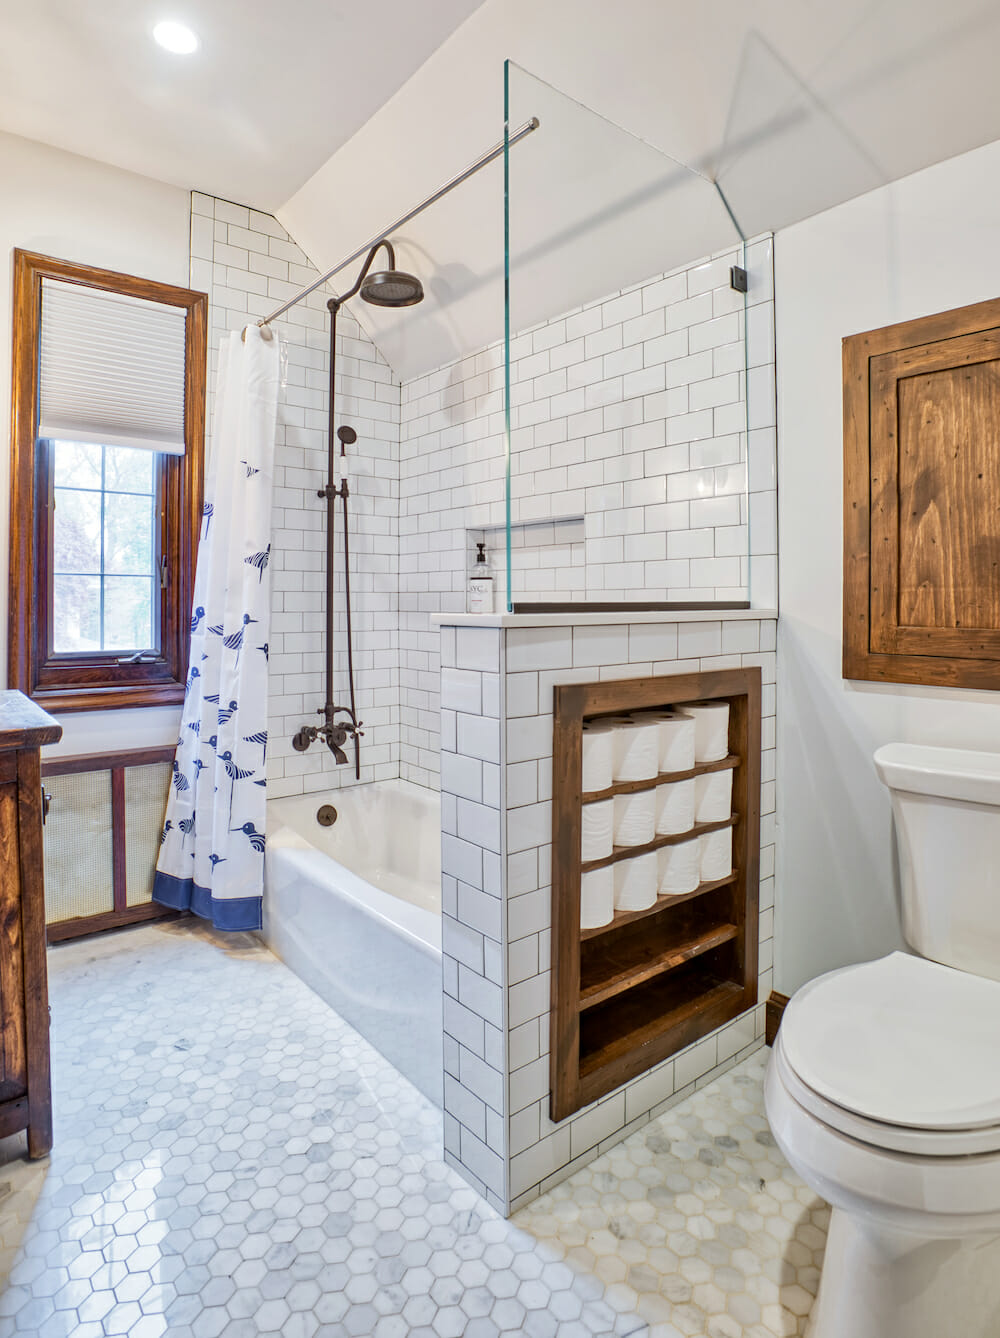 A white bathroom with built-in wood shelves full of toilet paper rolls.